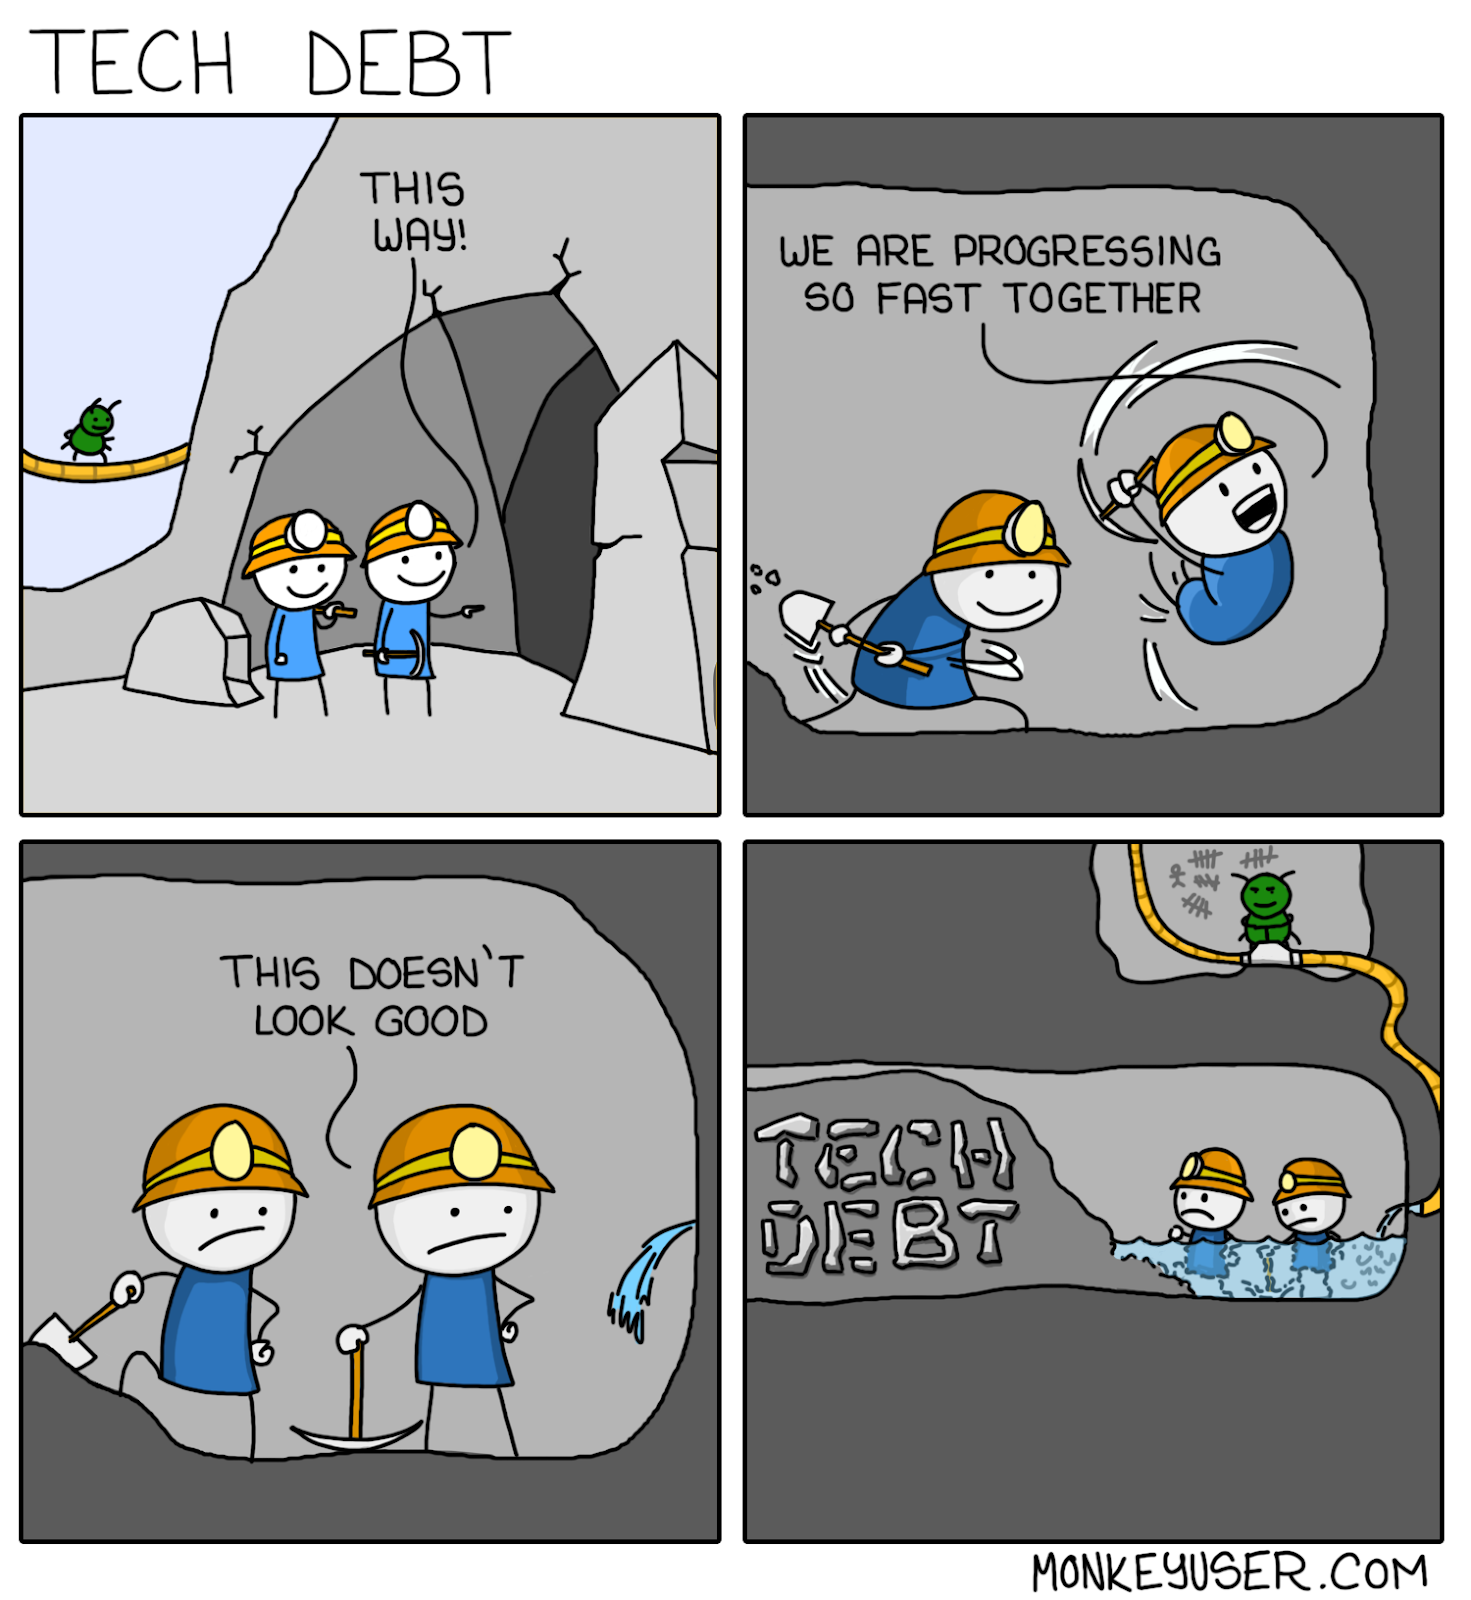 A four panel comic labeled technical debt of two figures mining a tunnel. The figures are first making fast progress but then notice a water leak ahead. They realize that they are trapped by mining debris behind them they produced while tunneling that is labeled technical debt.